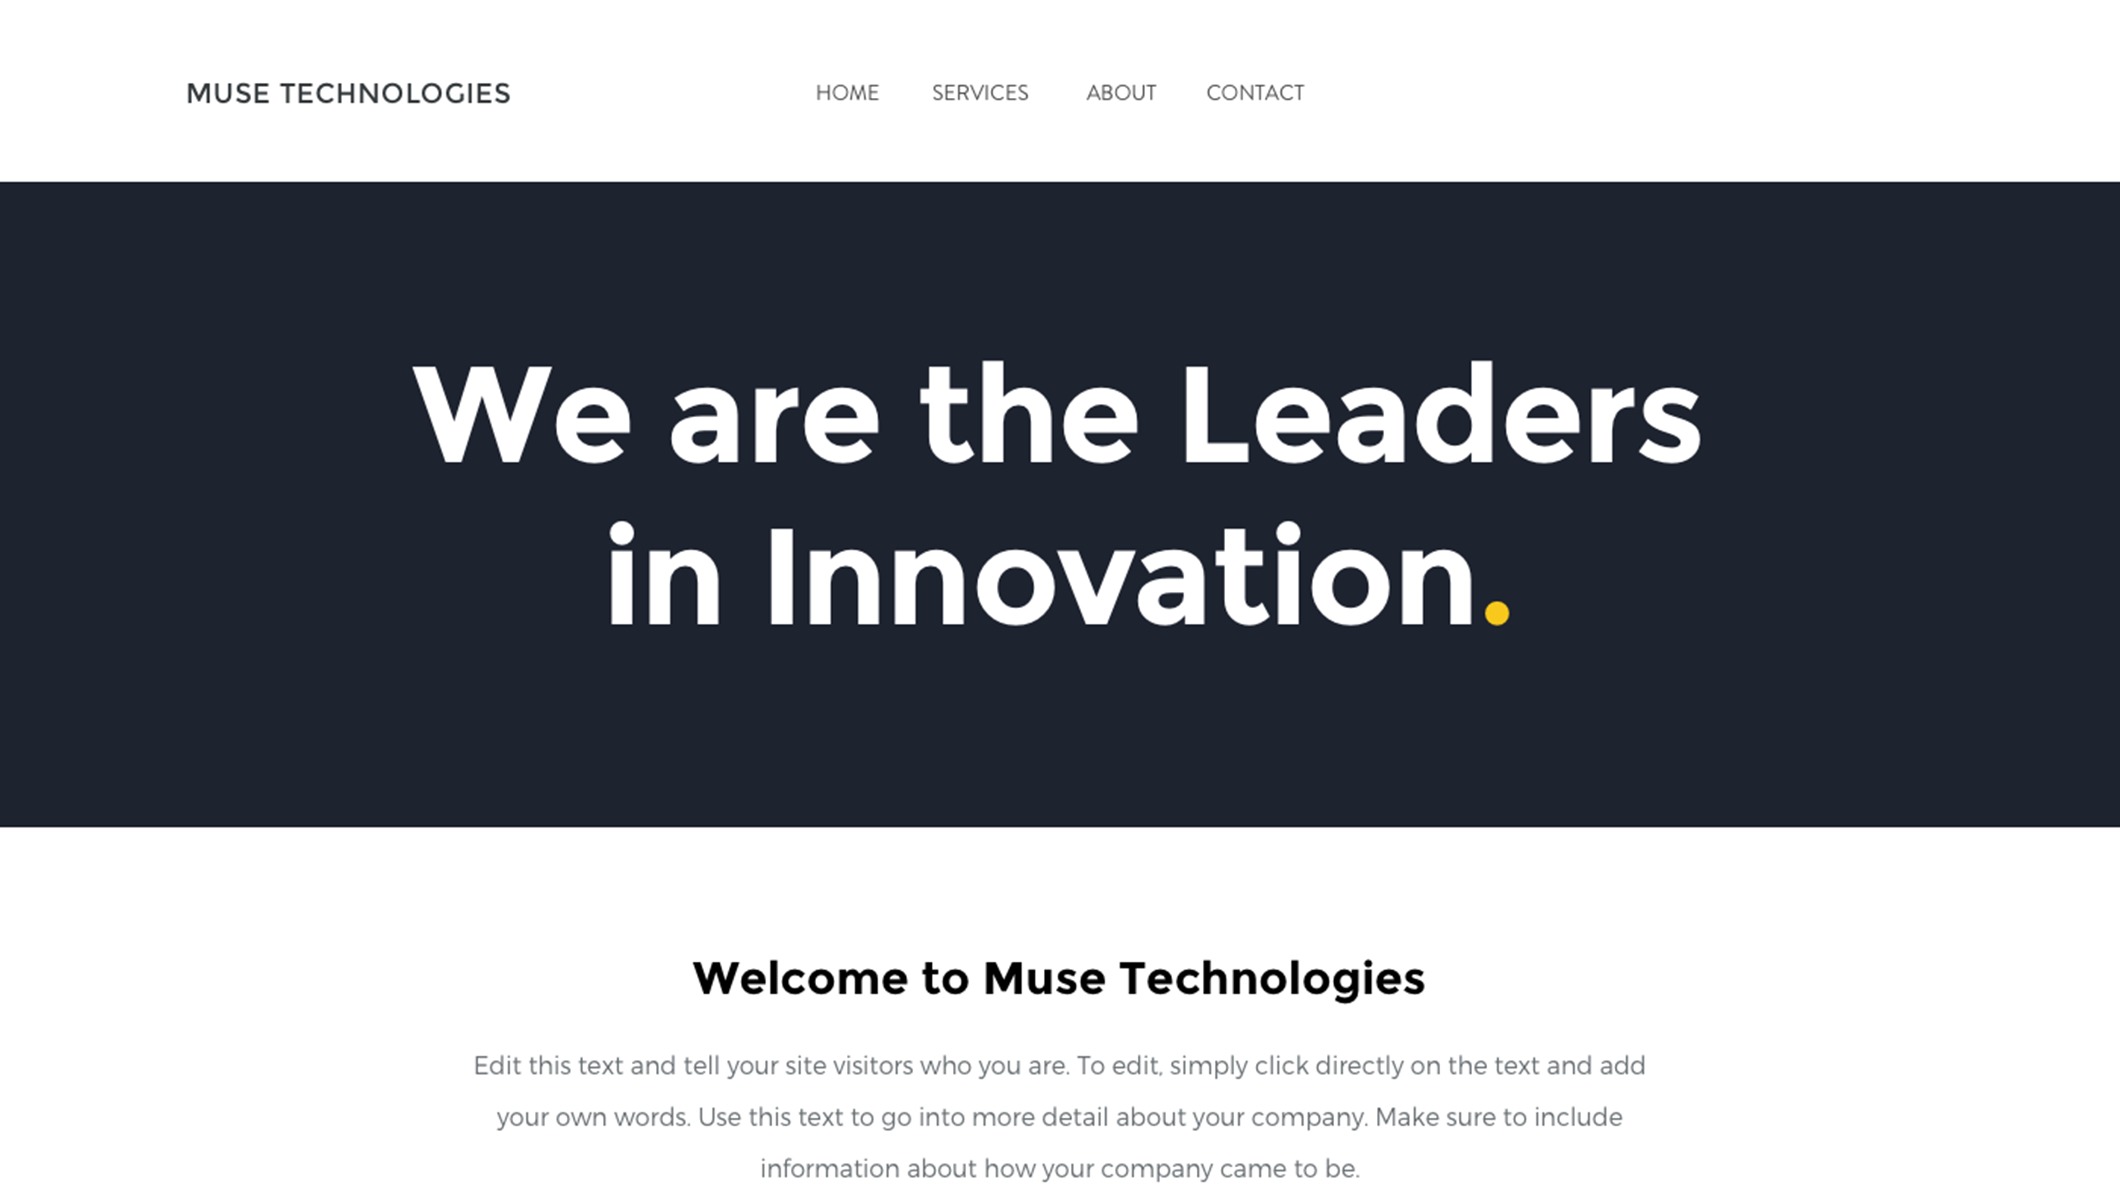 Muse TECHNOLOGIES - Home